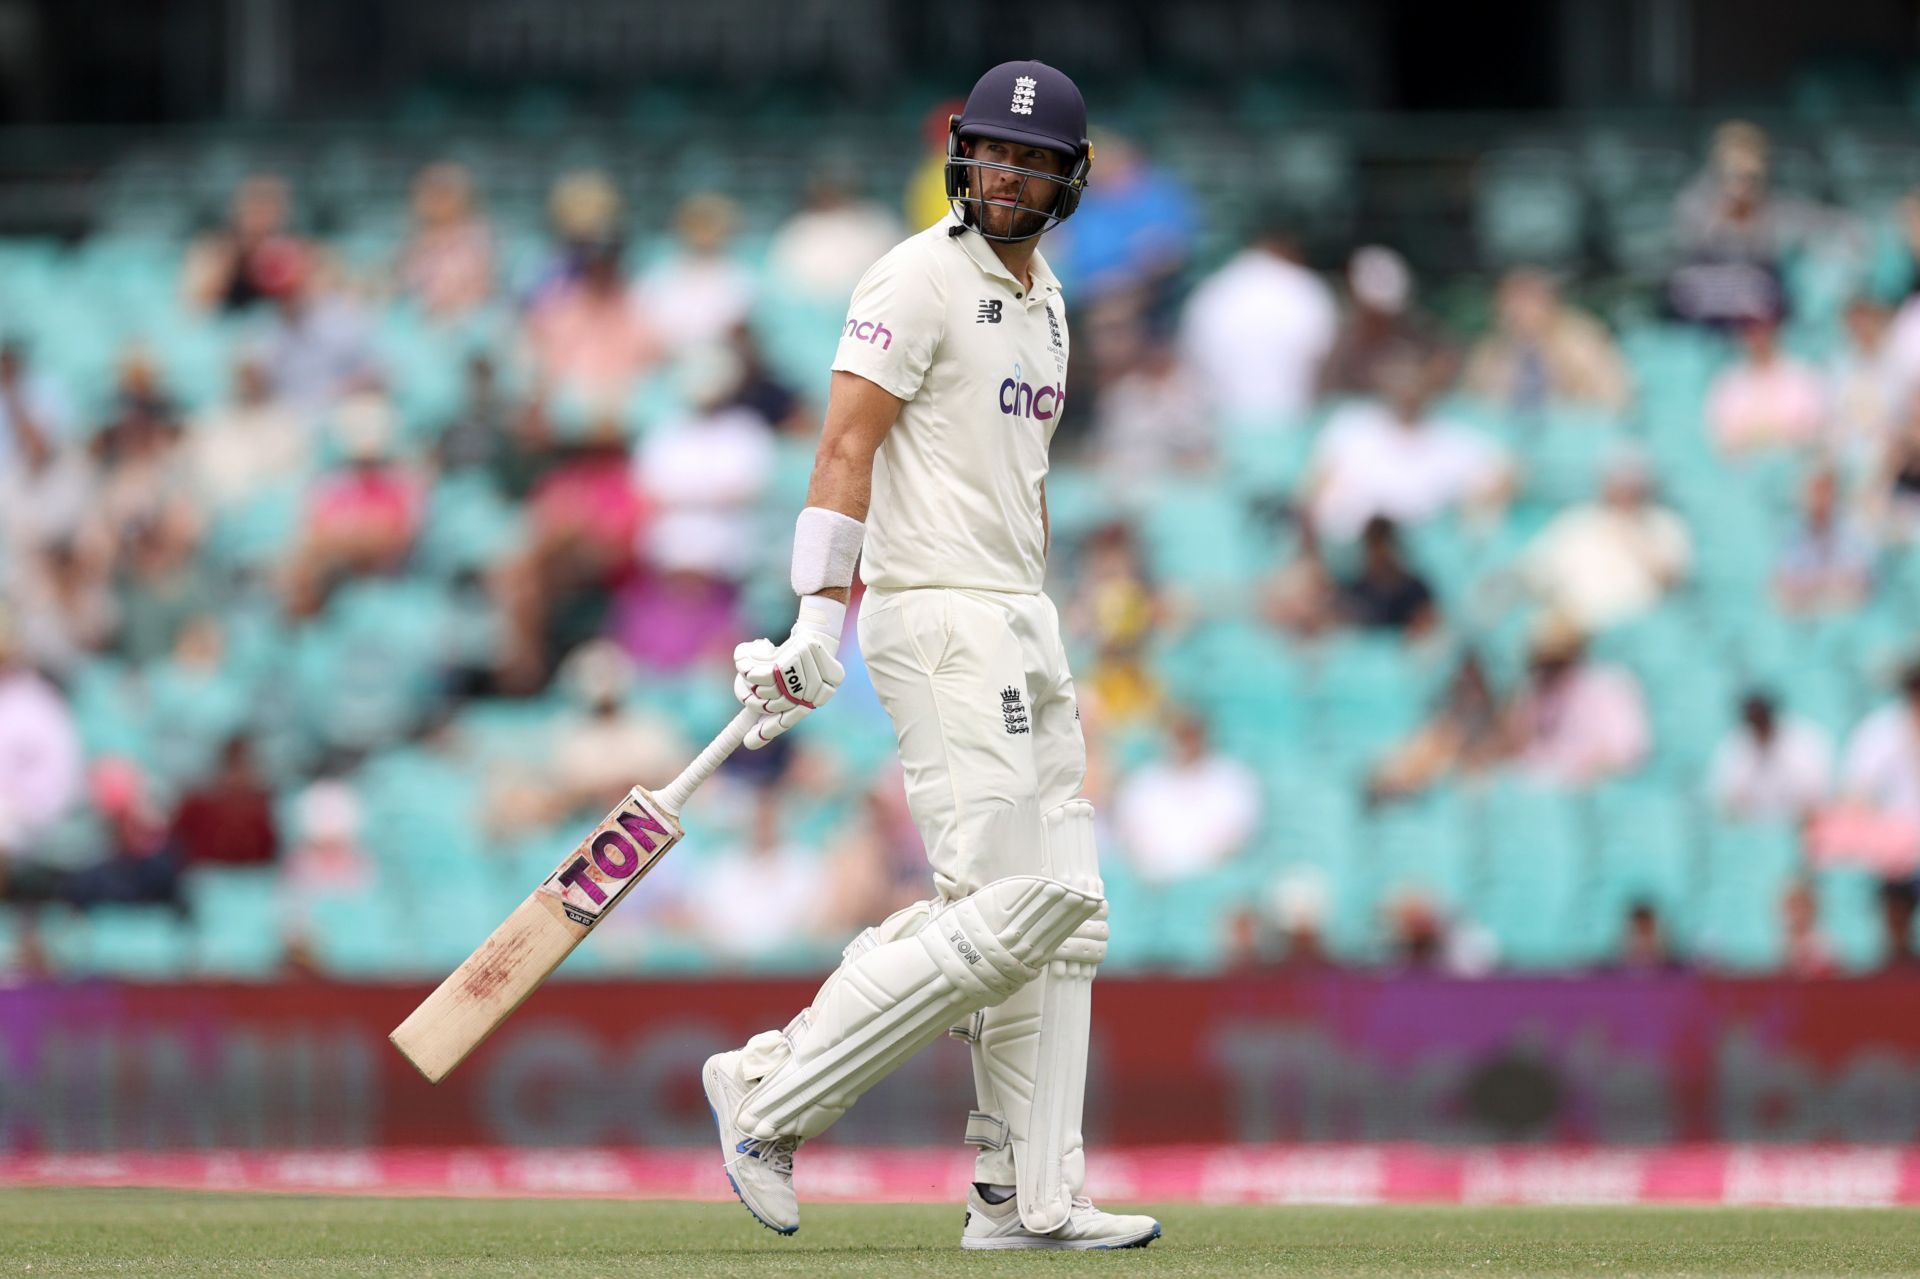 Dawid Malan went unsold at the IPL 2022 Auction